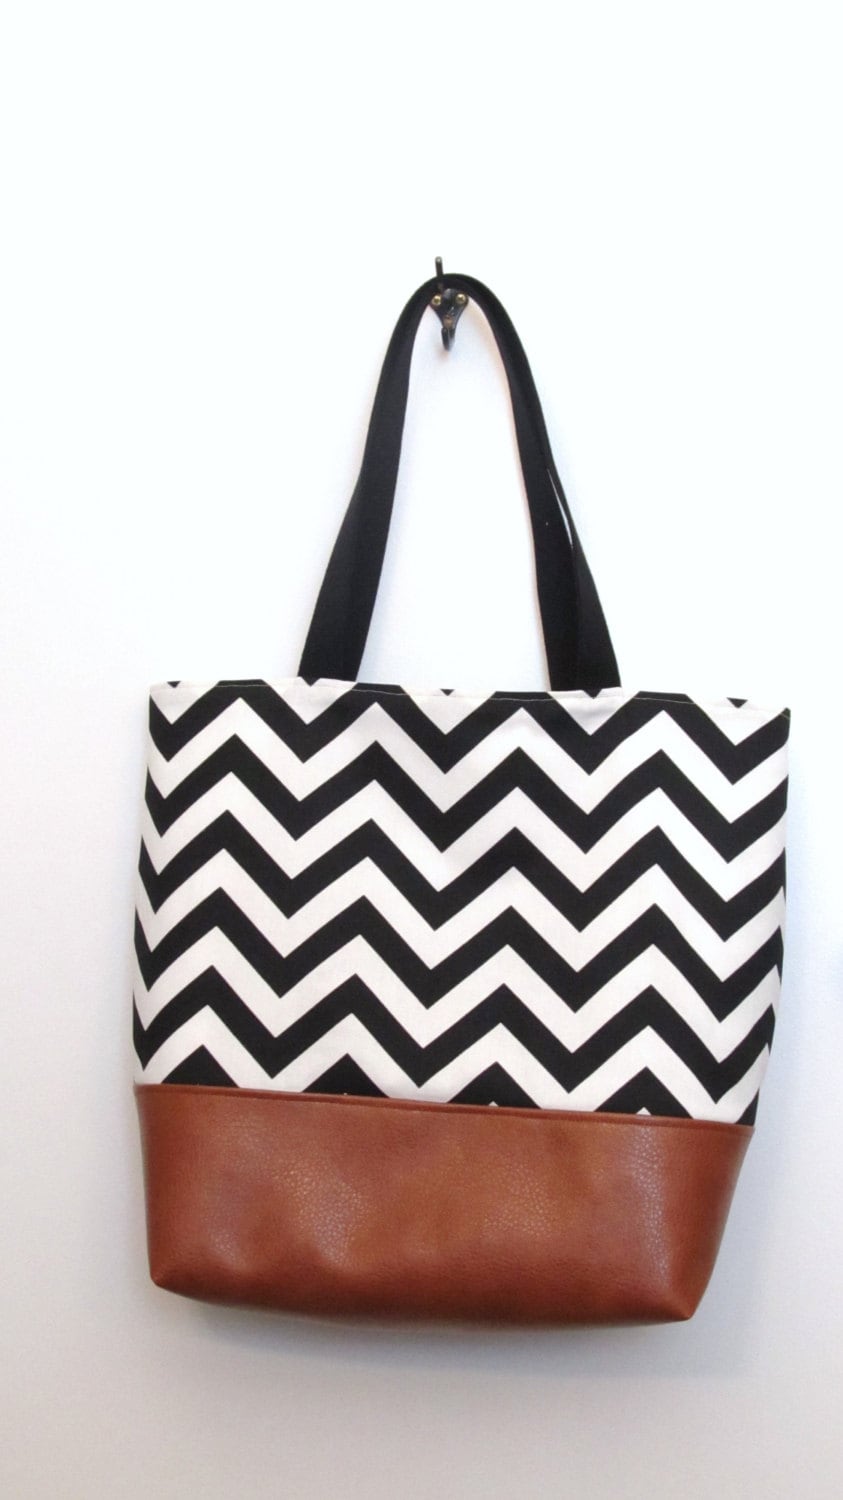 Extra Large Tote Bag / Black and White Chevron by bettyscorner